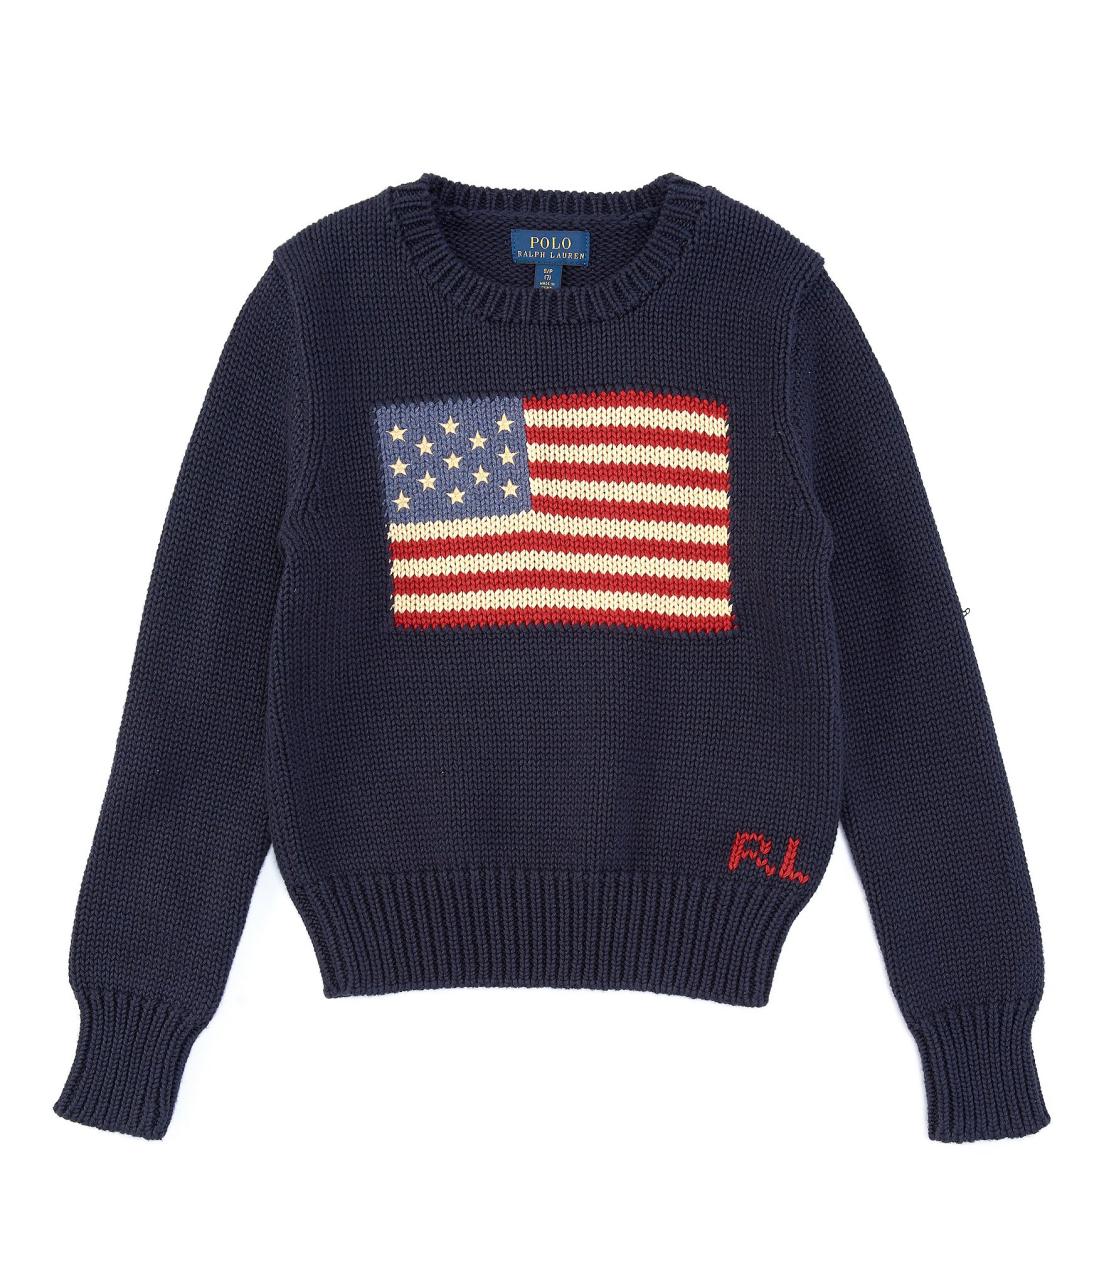 Symbolism Of Sweater With American Flag